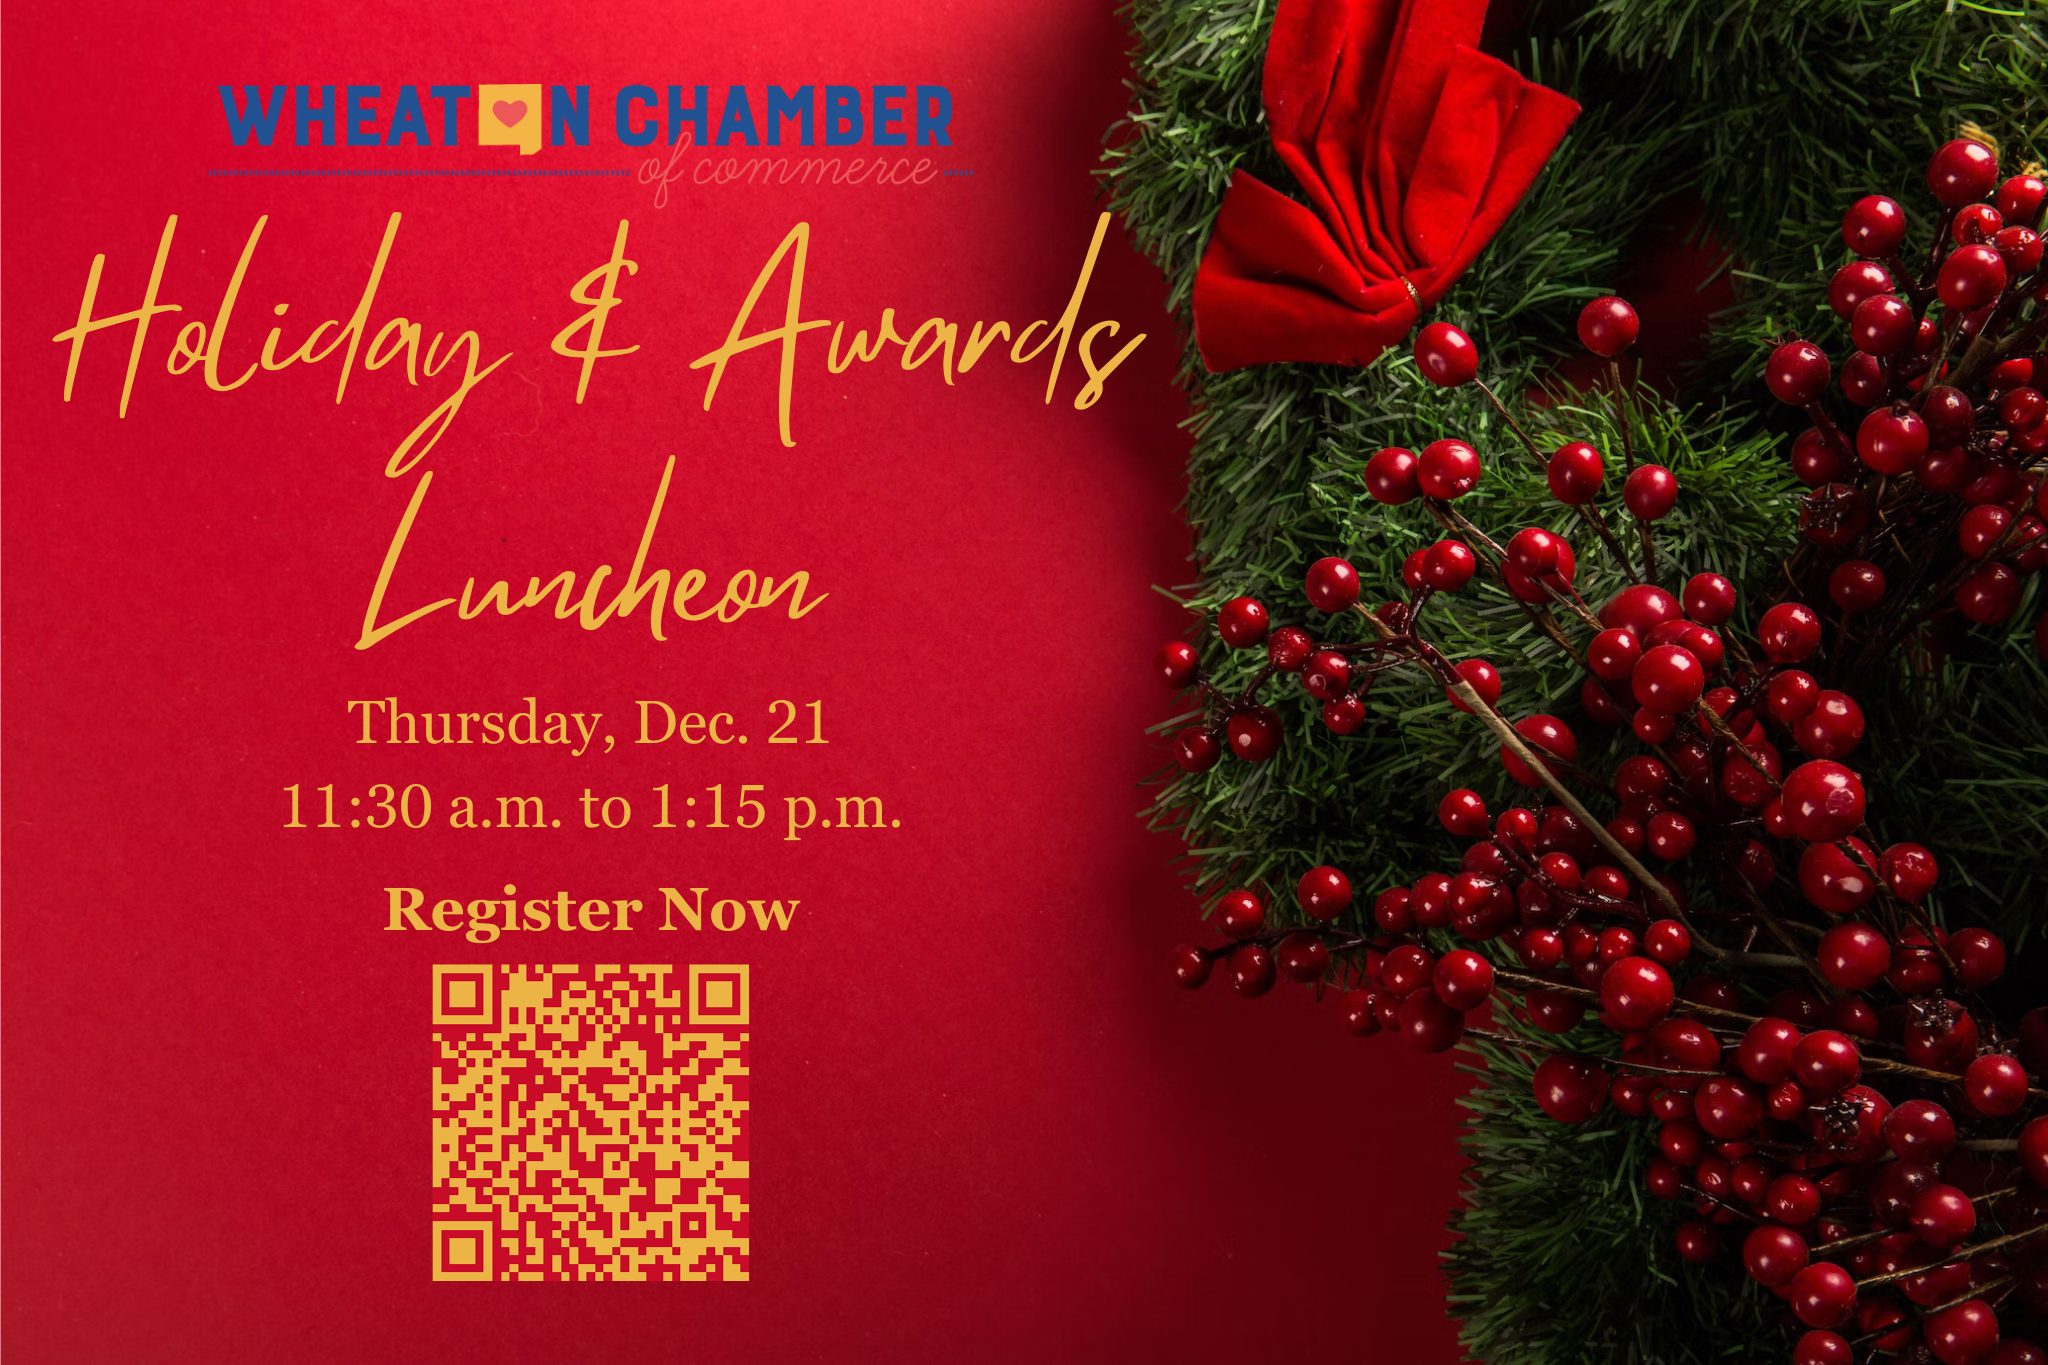 Holiday & Award Luncheon Thursday, Dec. 21 11:00 a.m. to 1:15 p.m. Register now https://wheatonchamber.chambermaster.com/eventregistration/register/23626